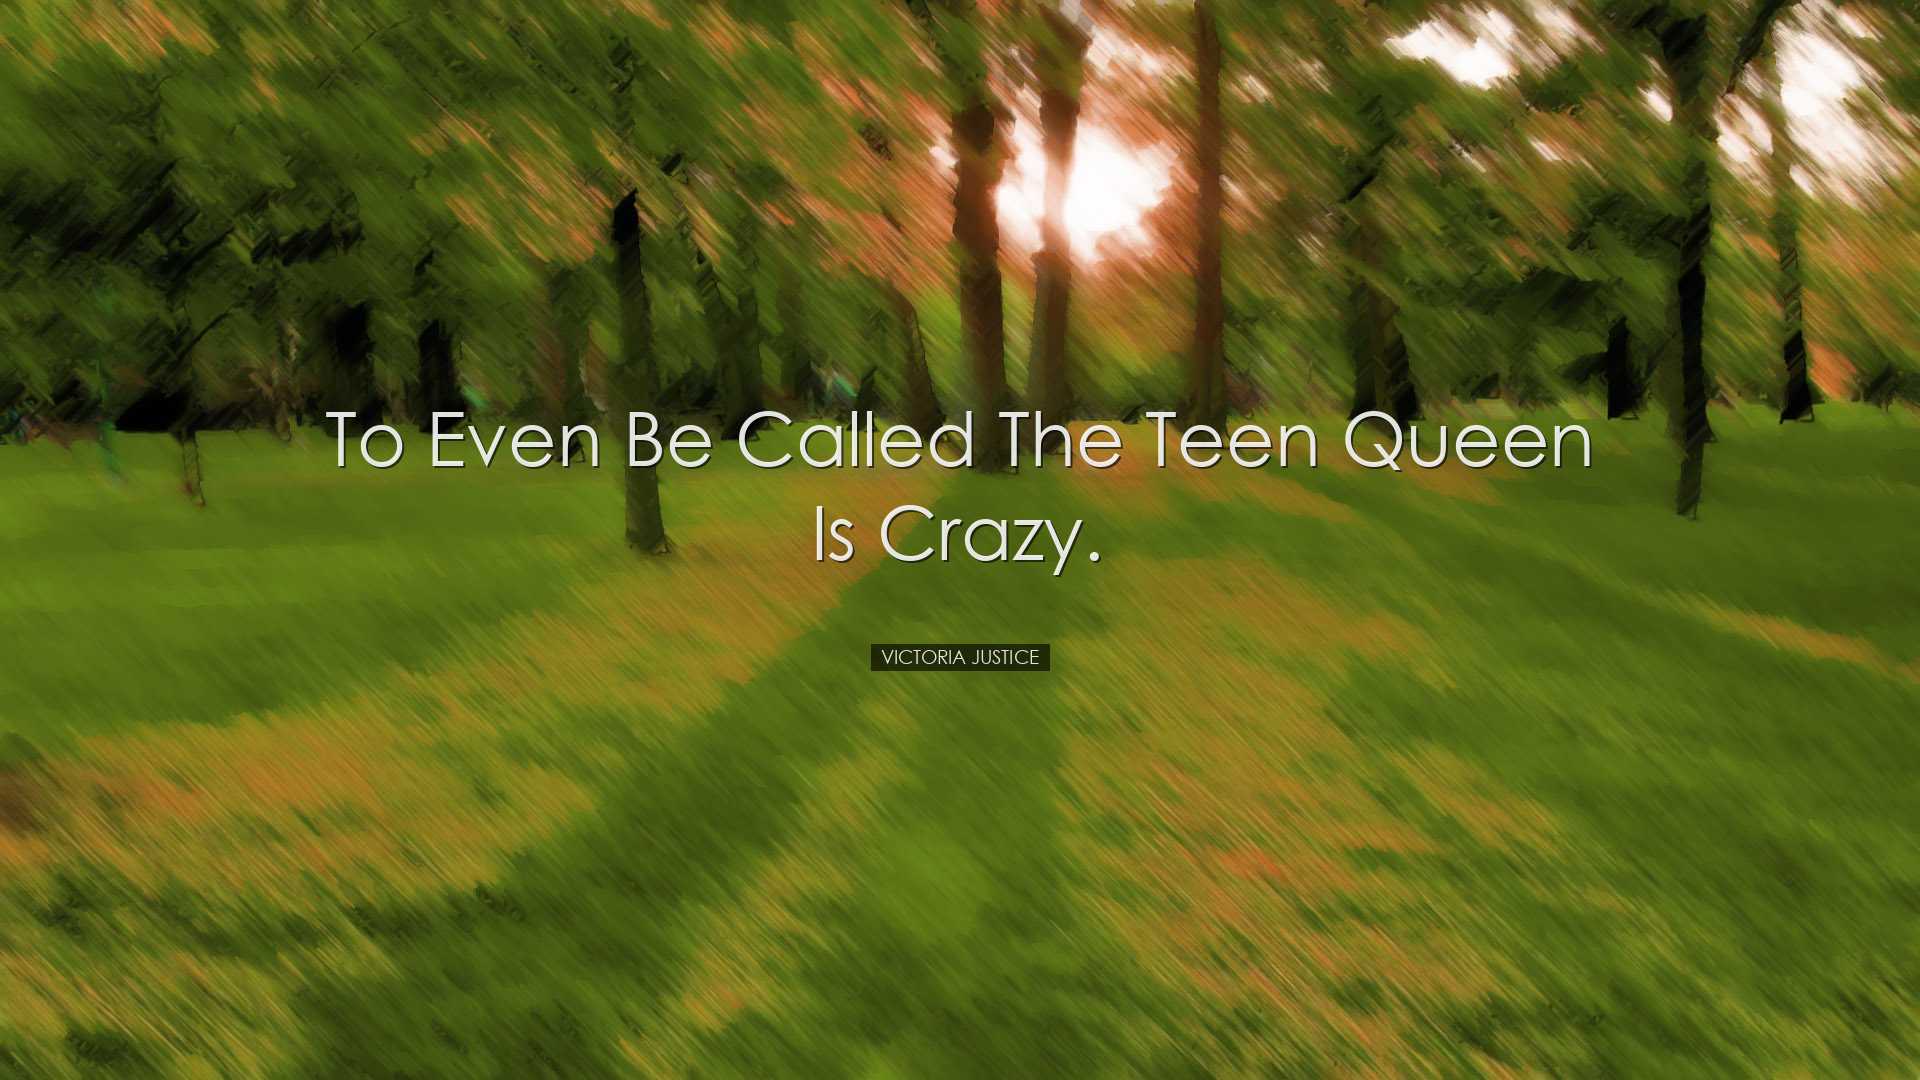 To even be called the teen queen is crazy. - Victoria Justice